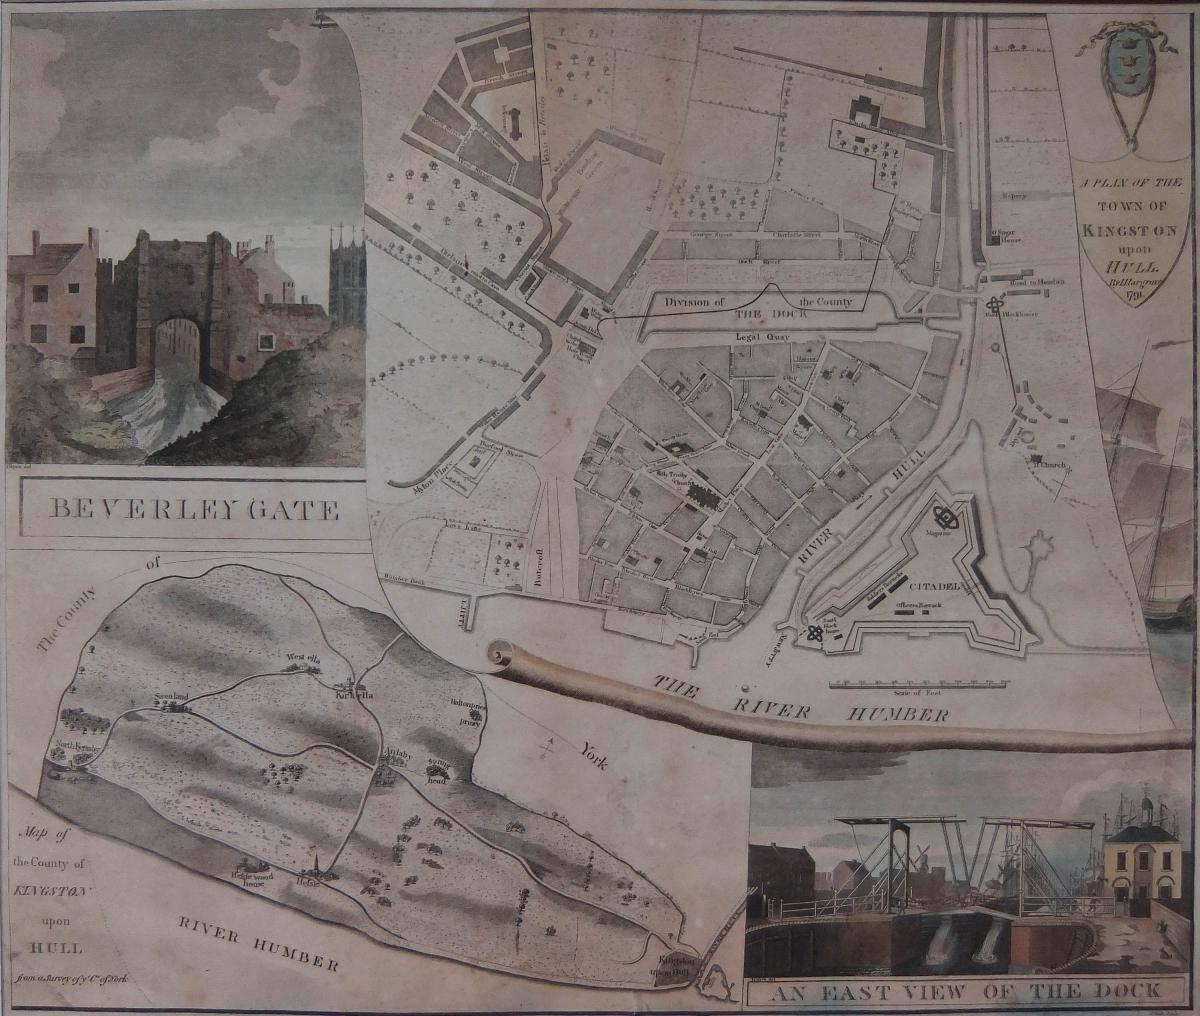 Hargrave "Plan of the Town of Kingston upon Hull" dated 1791